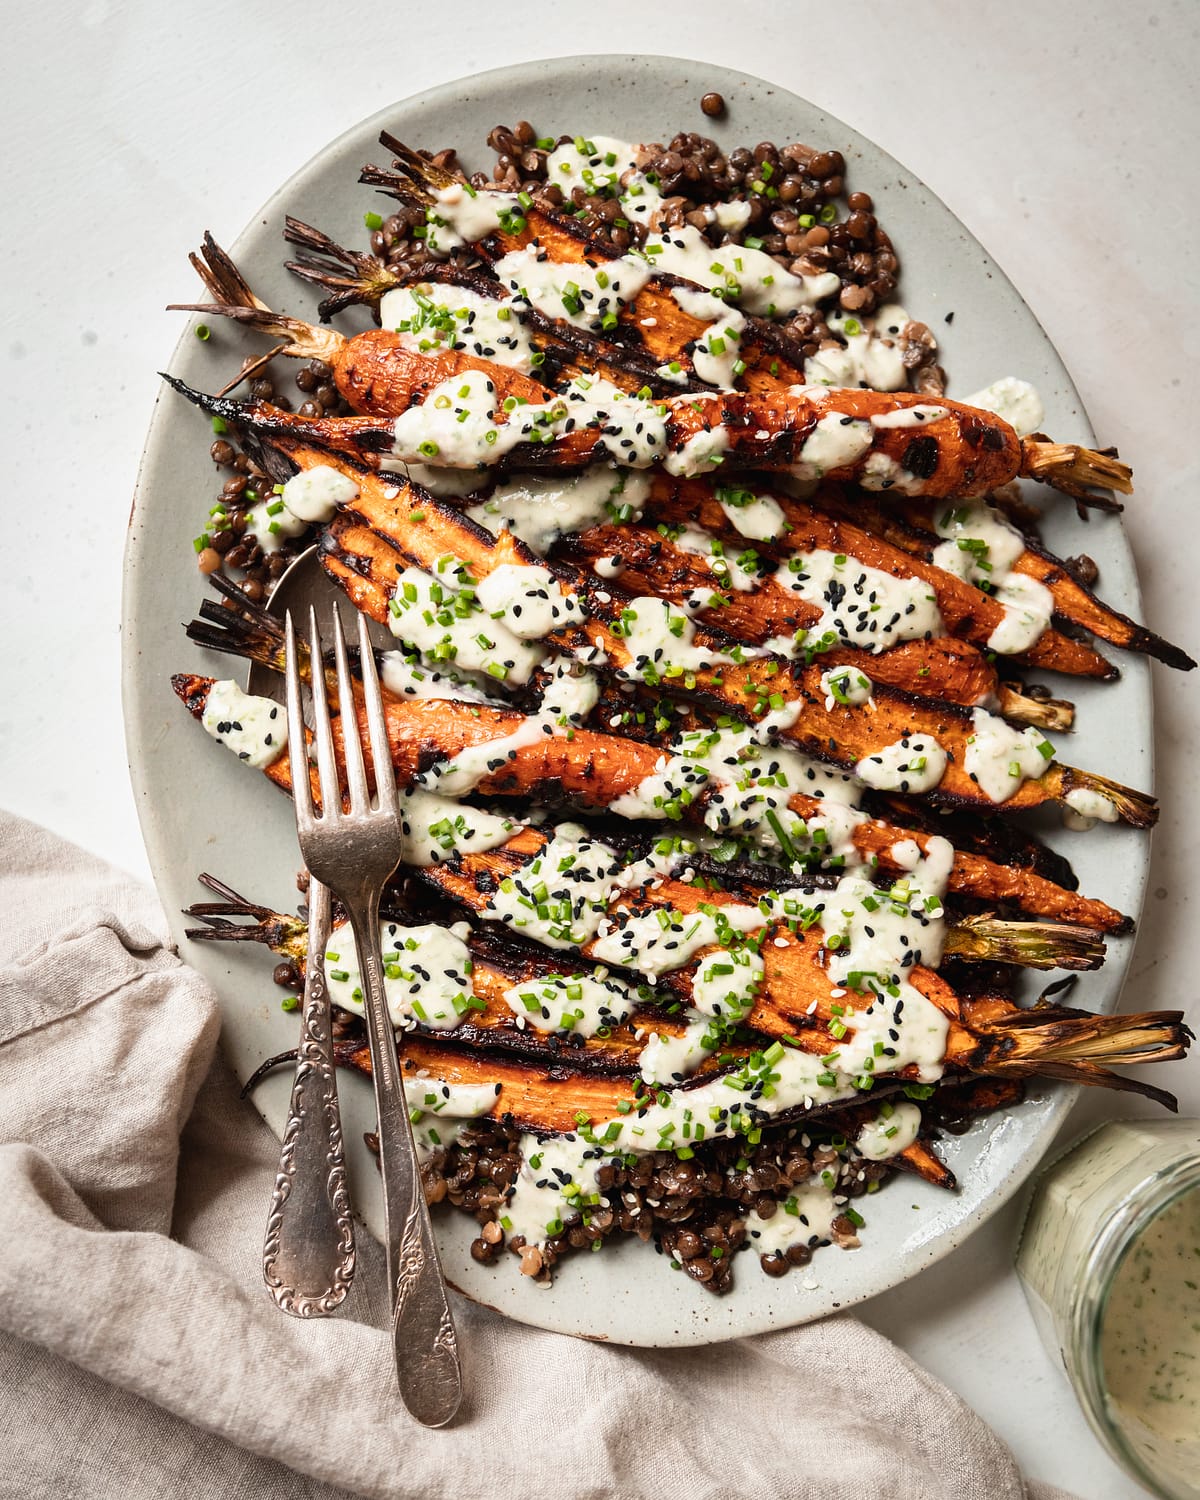 An overhead shot shows a light blue platter topped with cooked french lentils and grilled whole carrots, all topped with a creamy chive-flecked sauce. Extra chives and sesame seeds garnish the dish.